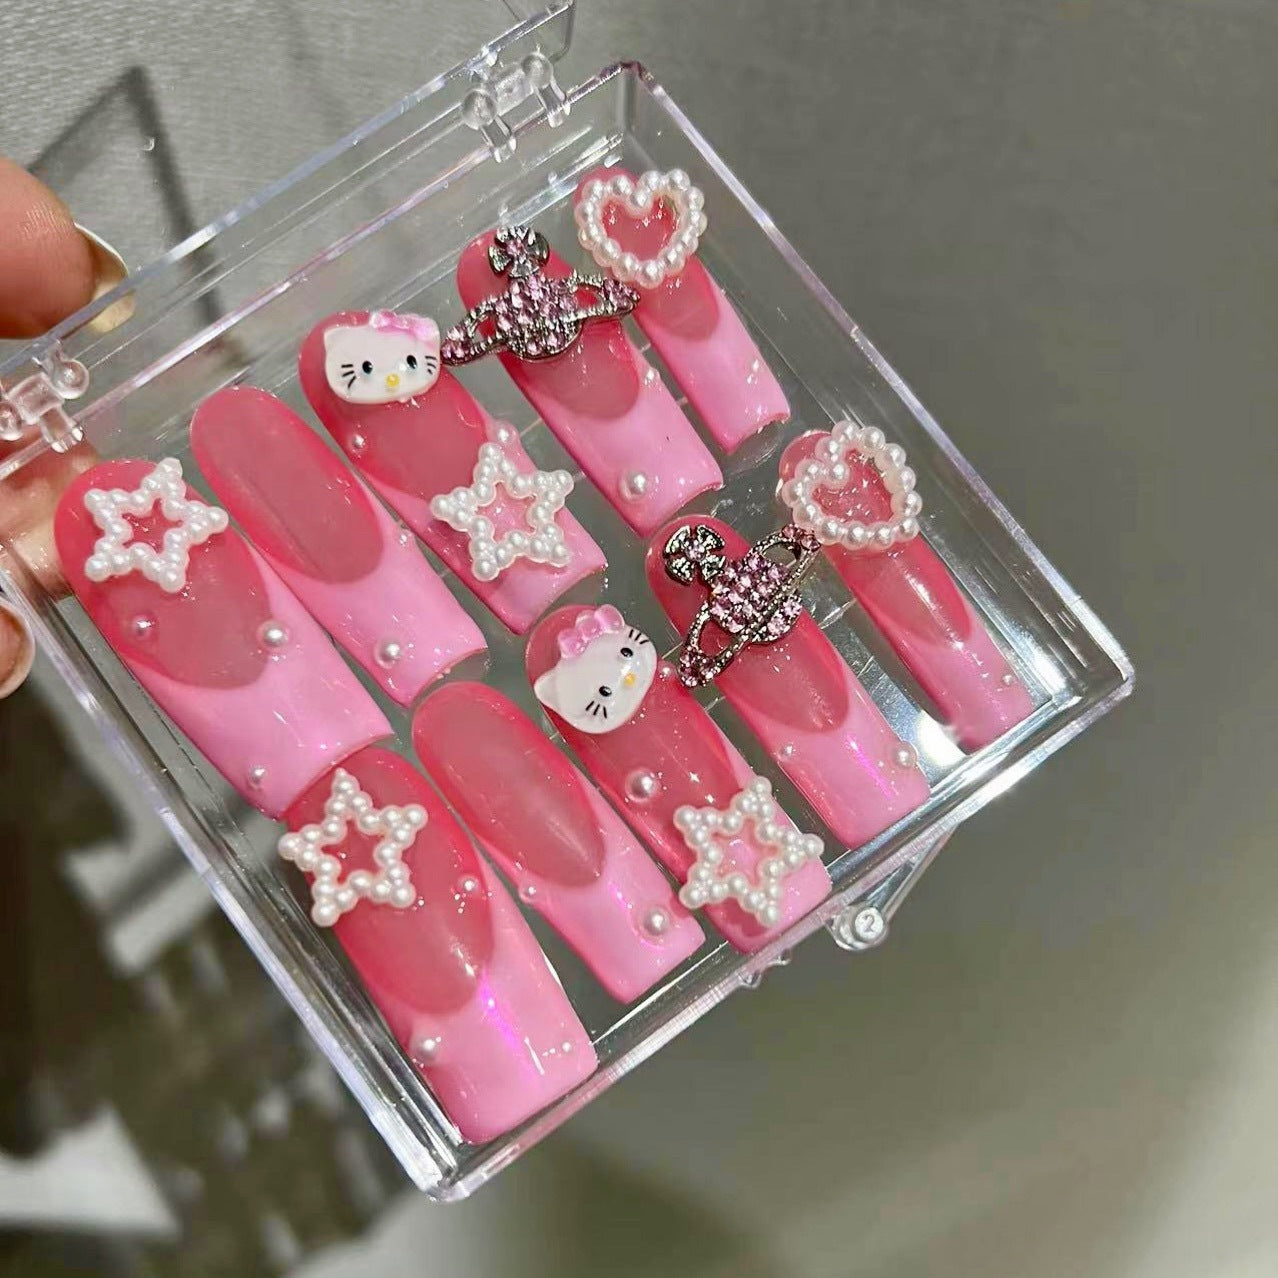 HELLOKITTY-TEN PIECES OF HANDCRAFTED PRESS ON NAIL